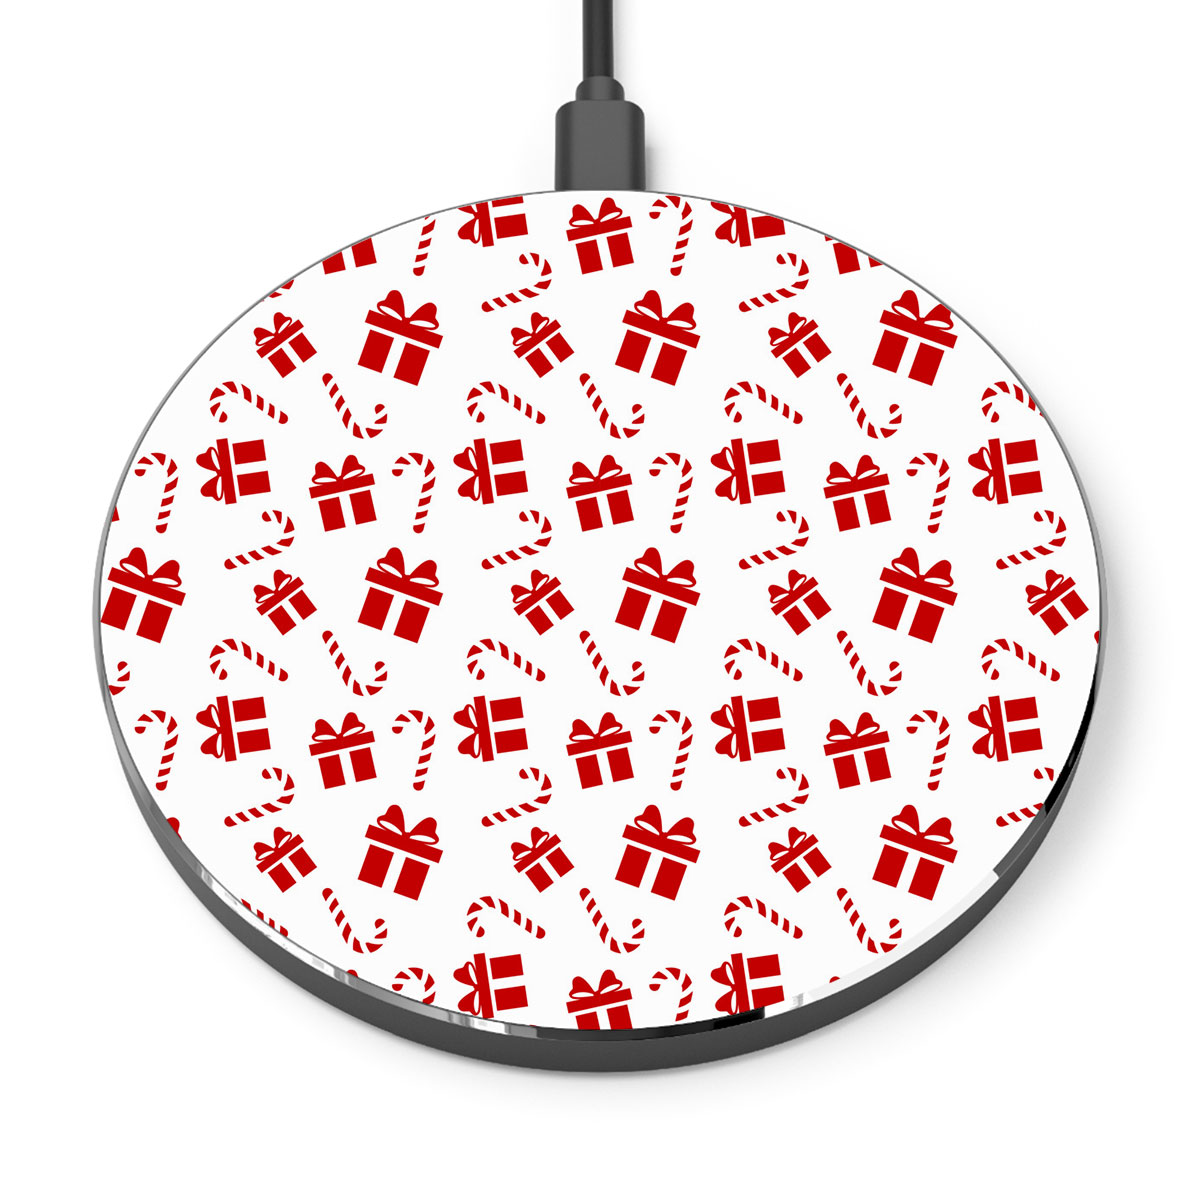 Christmas Gifts And Candy Canes Seamless White Pattern Printed Wireless Charger